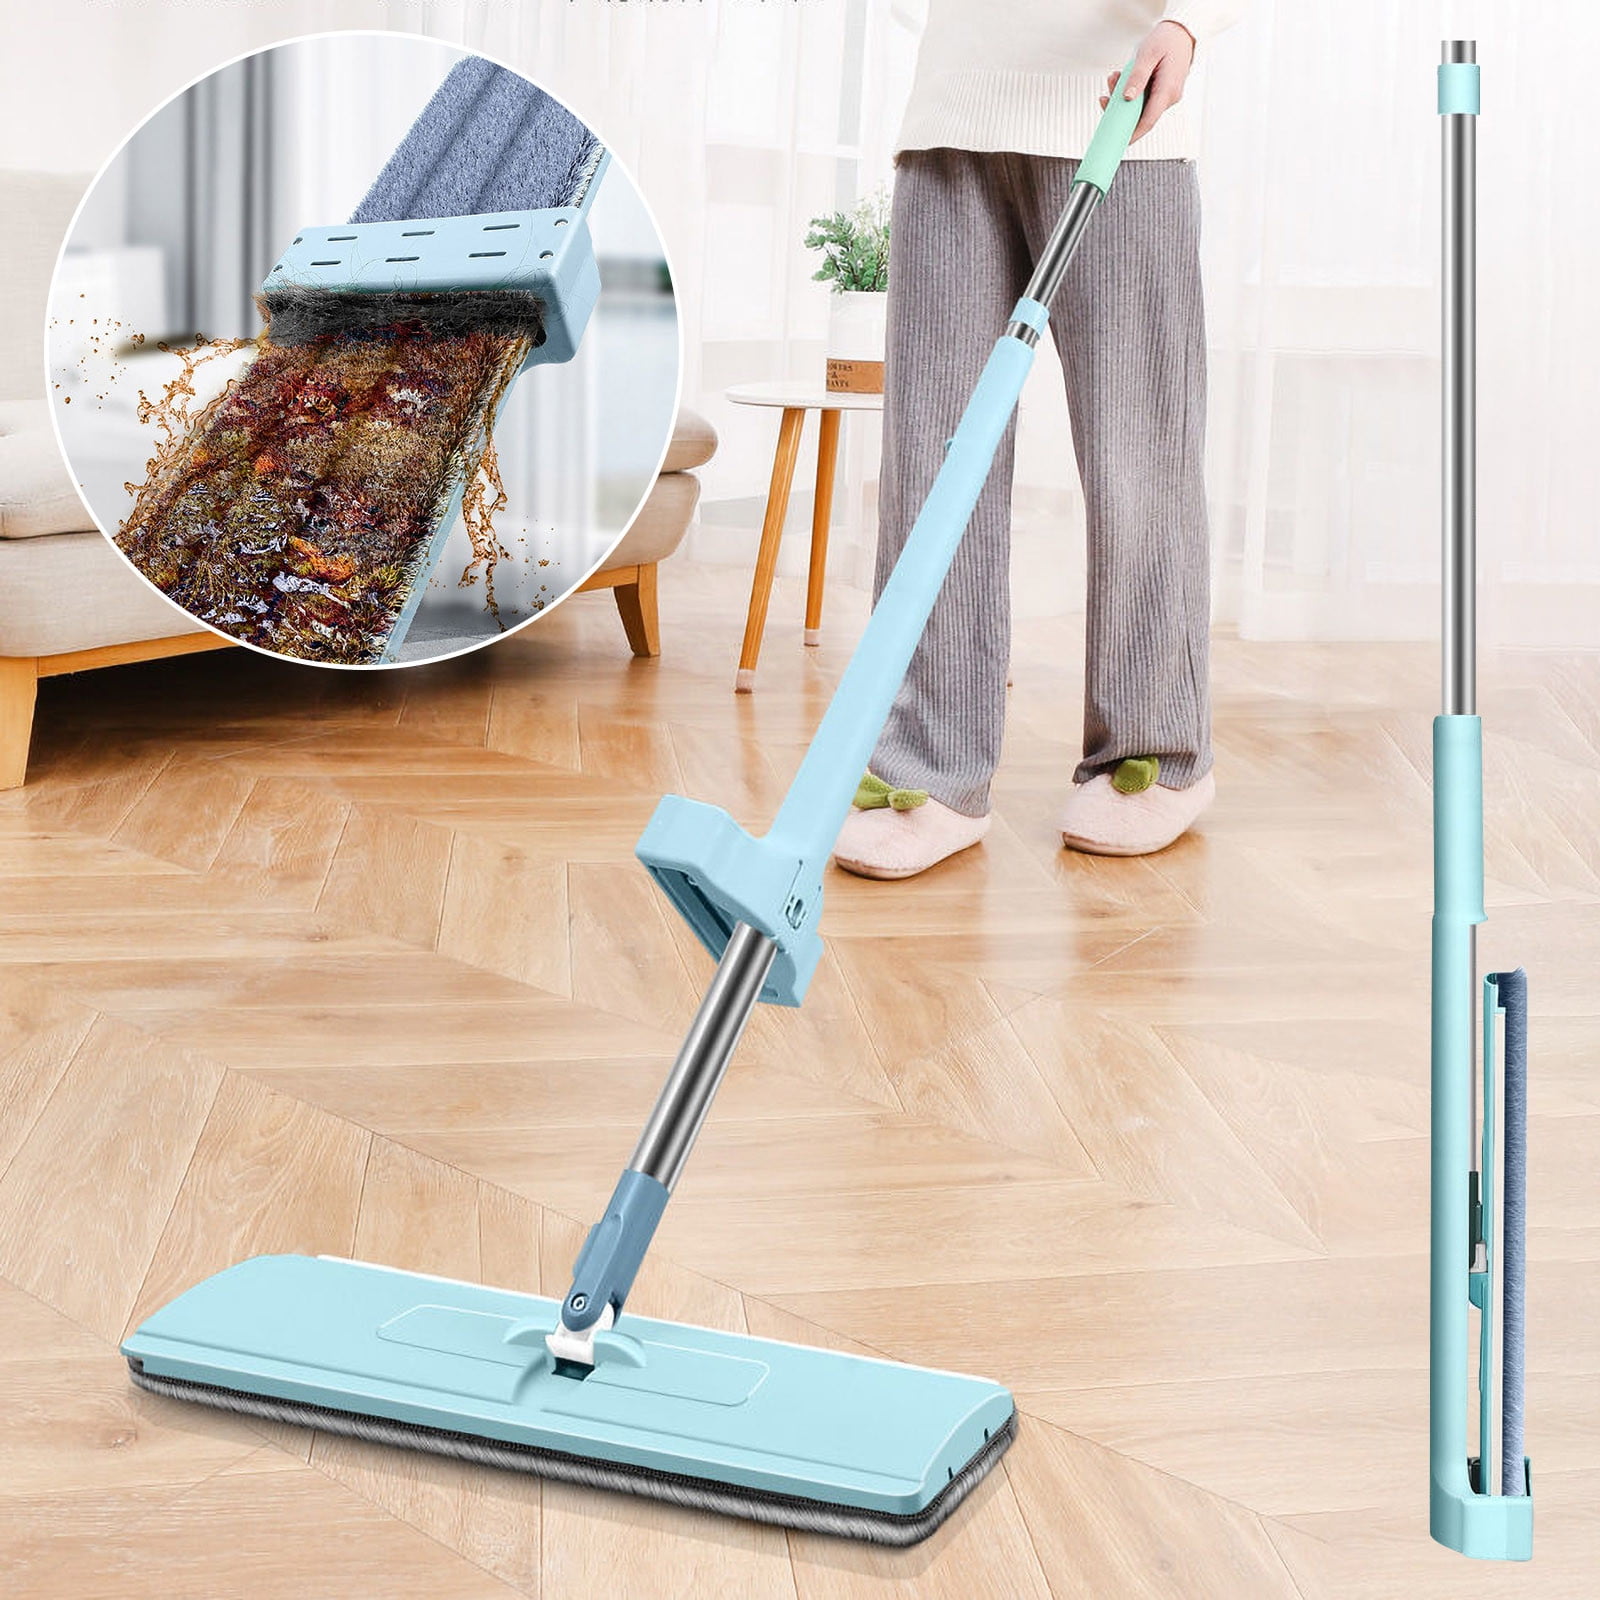 SDJMa Self Wringing Flat Mop, 360 Degreeds Rotoable Hands Free Wash  Microfiber Floor Mop, Stainless Steel Handle and Reusable Microfiber Pad,  Flat Mop for Hardwood Laminate Tile 